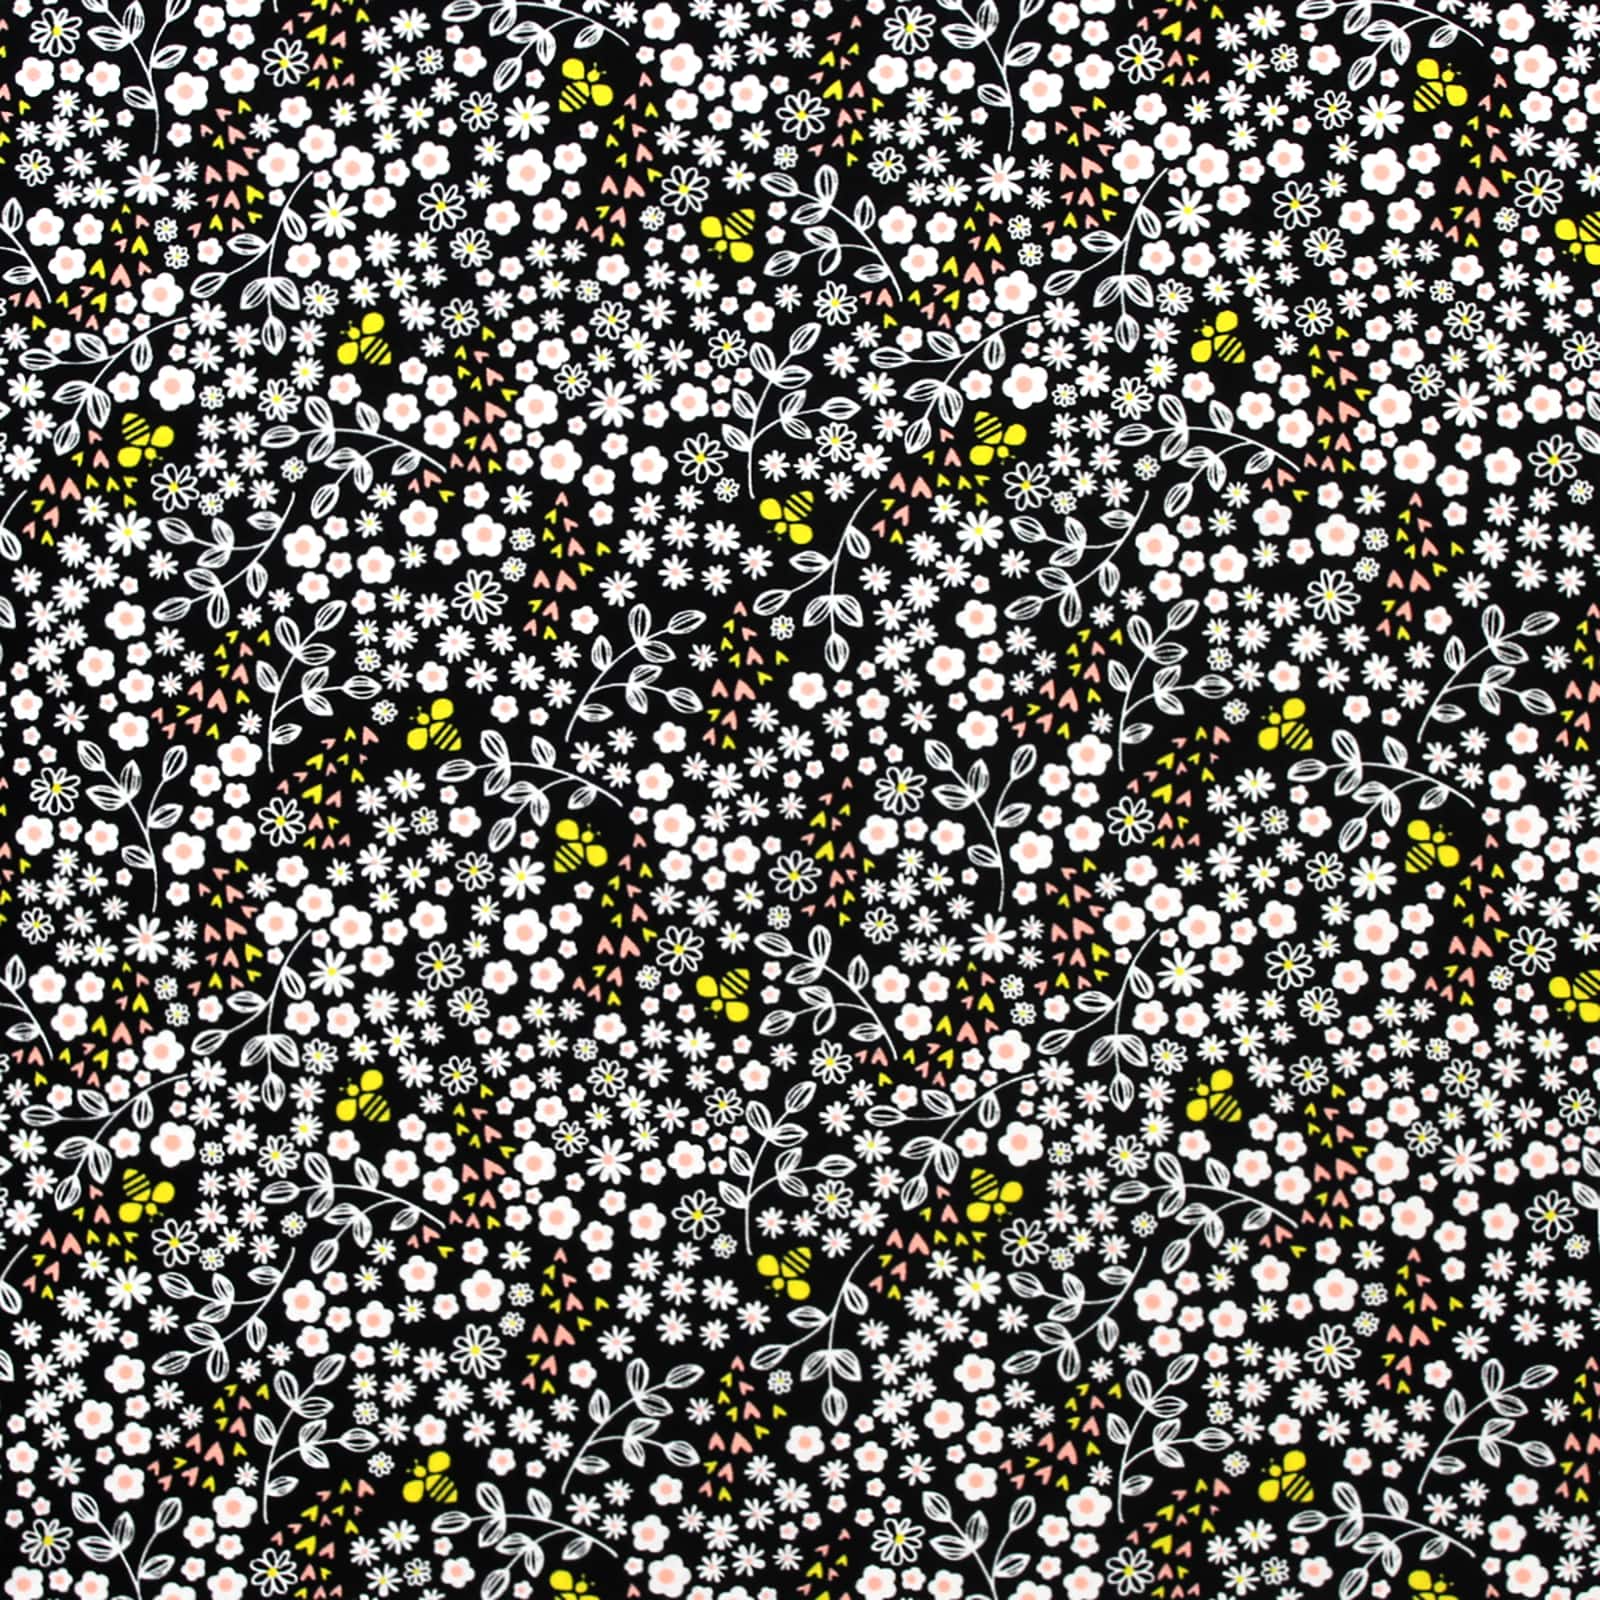 Camelot Fabrics Beeyoutiful Black Ditsy Floral Cotton Fabric